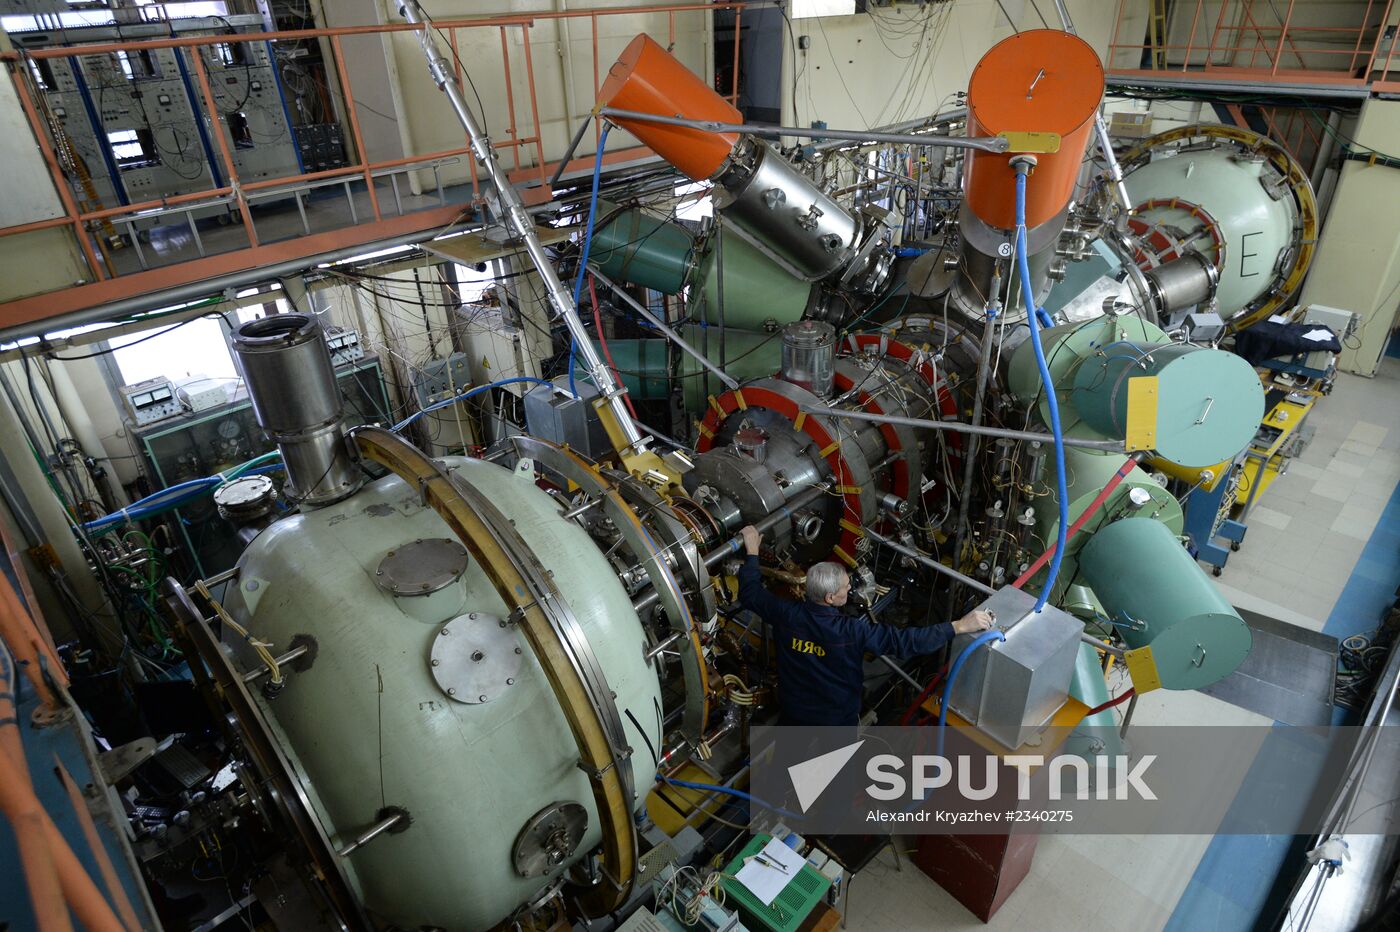 Plasma studies facilities at Institute for Nuclear Physics, Novosibirsk